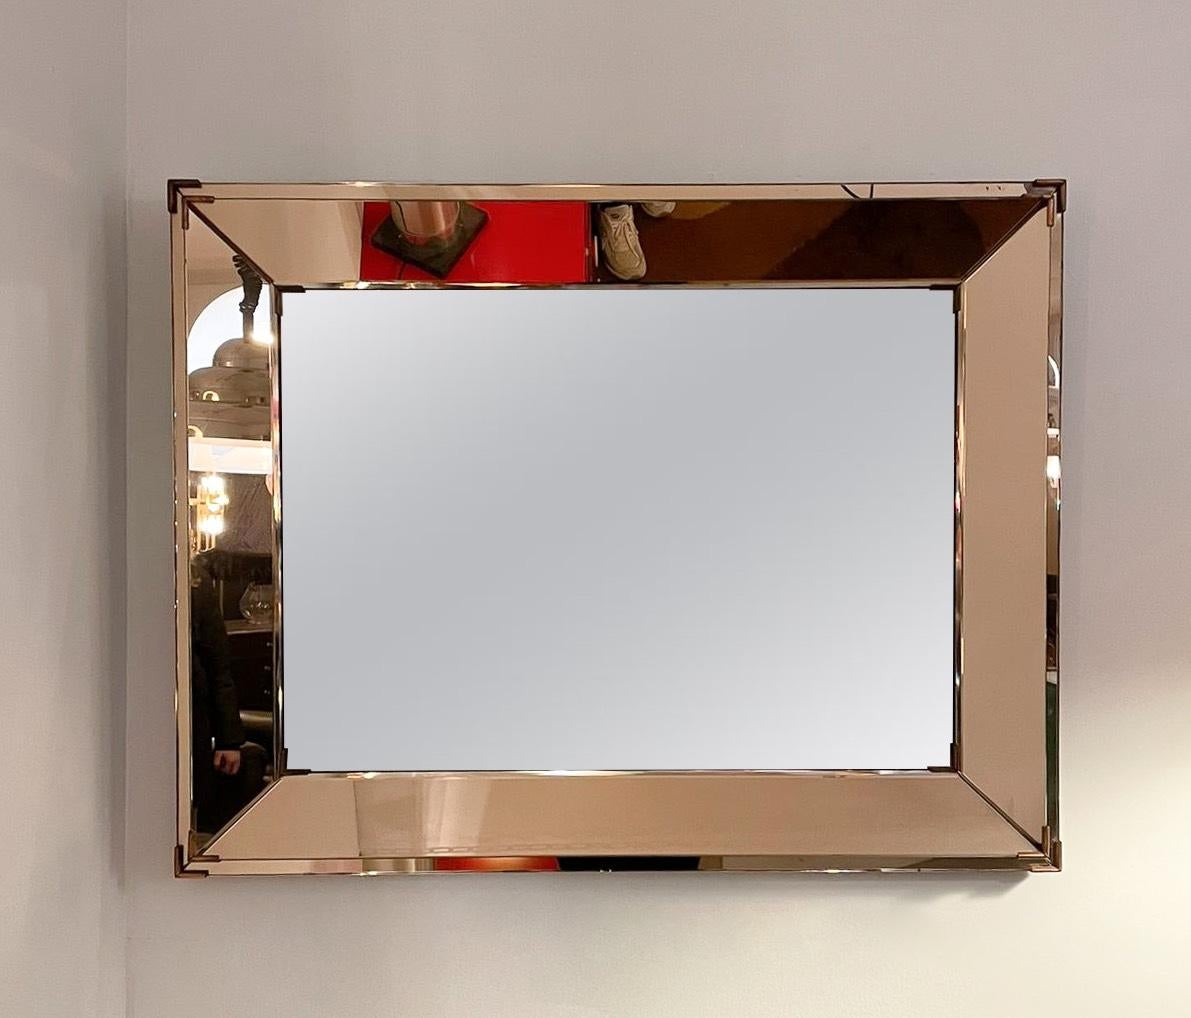 Mid-Century Modern Mirror in the style of Jacques Adnet, 1940s For Sale 1